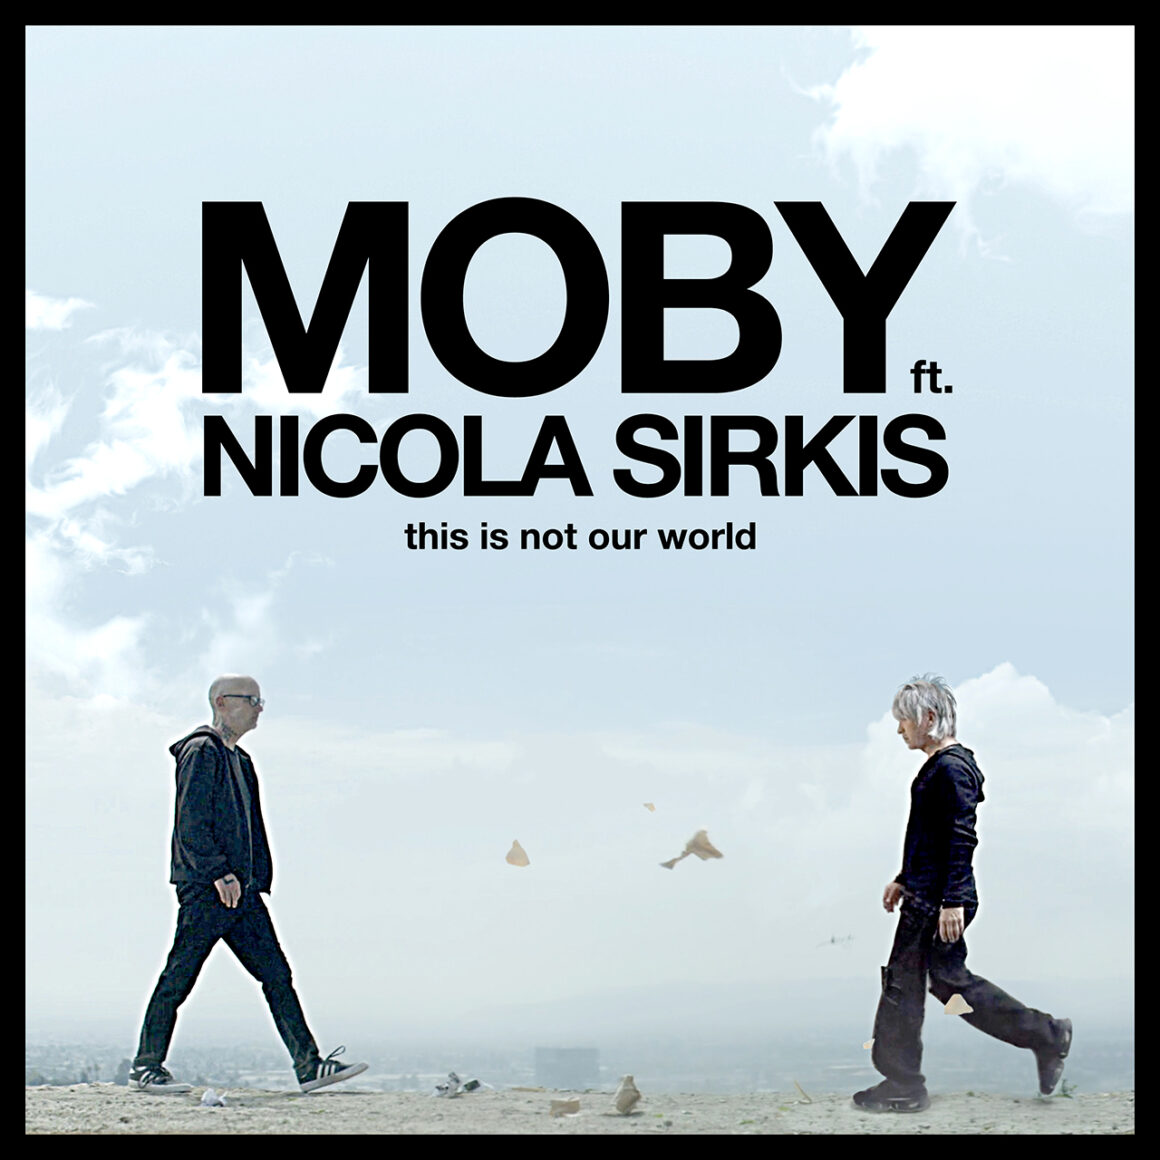 Moby ft. Nicola Sirkis, oeuvre unique, @moby